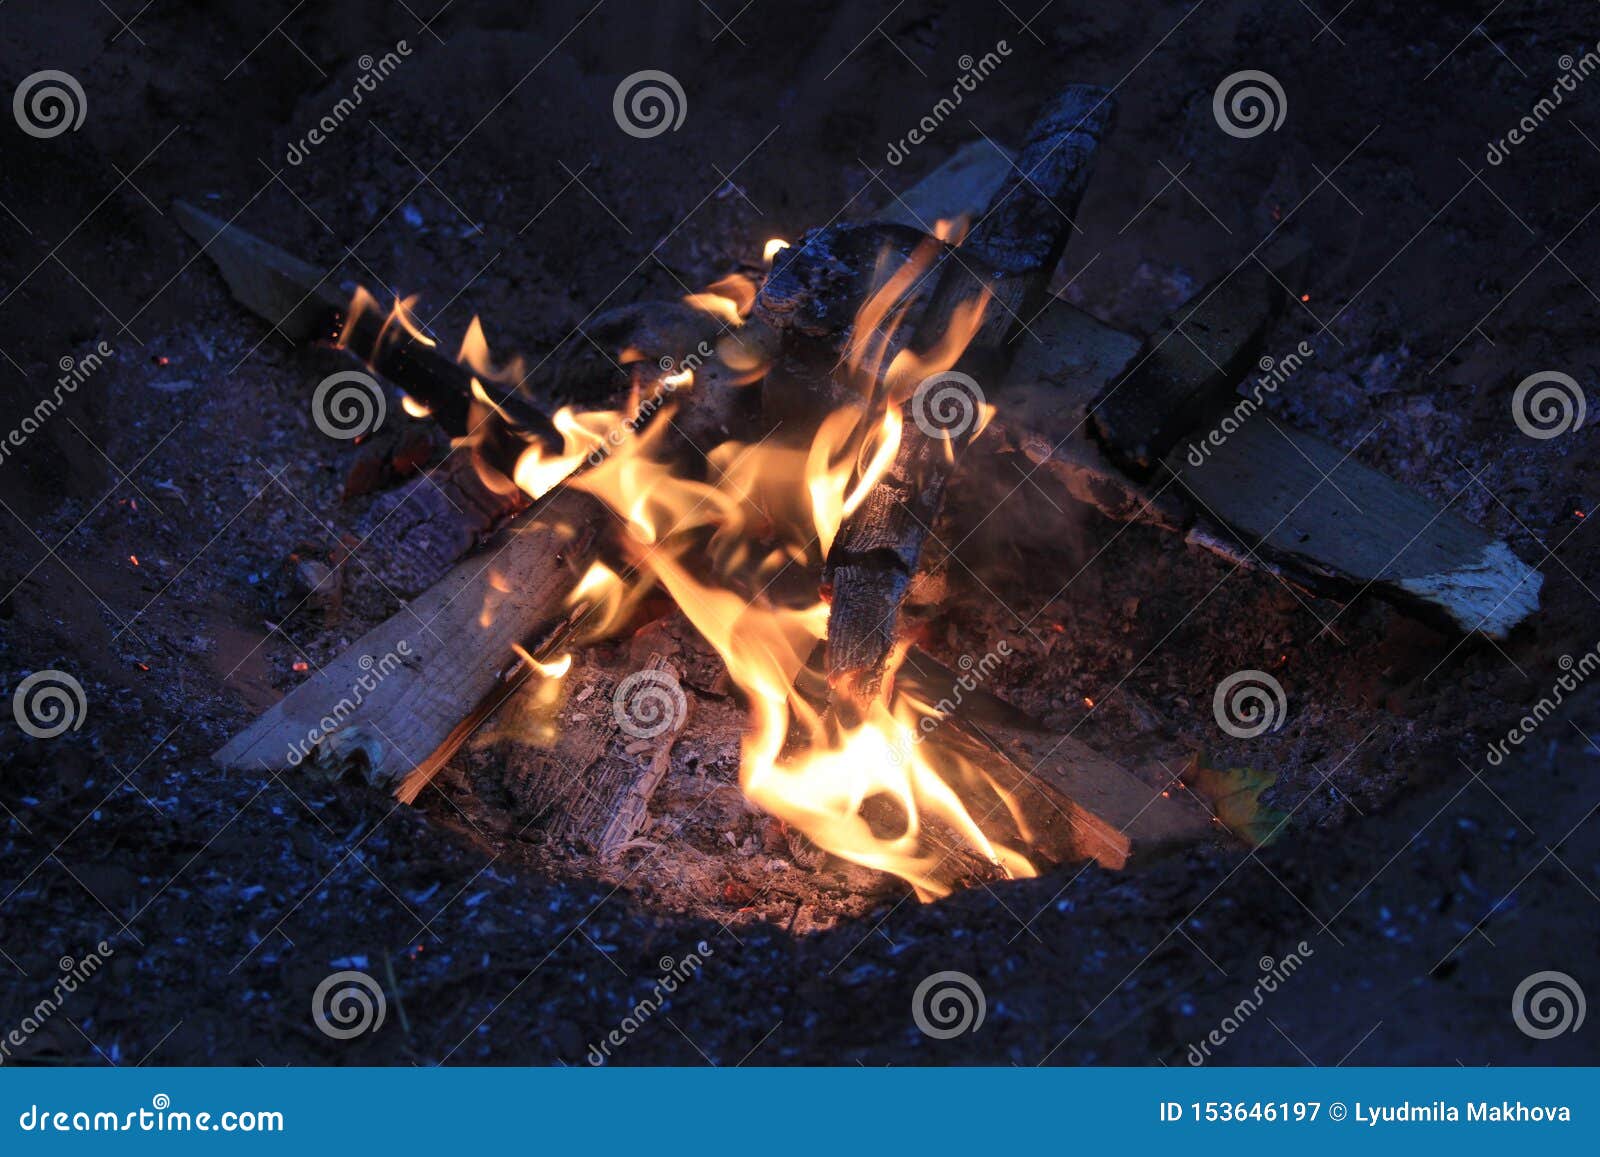 A Bonfire in a Camping at the Night Stock Image - Image of camp ...